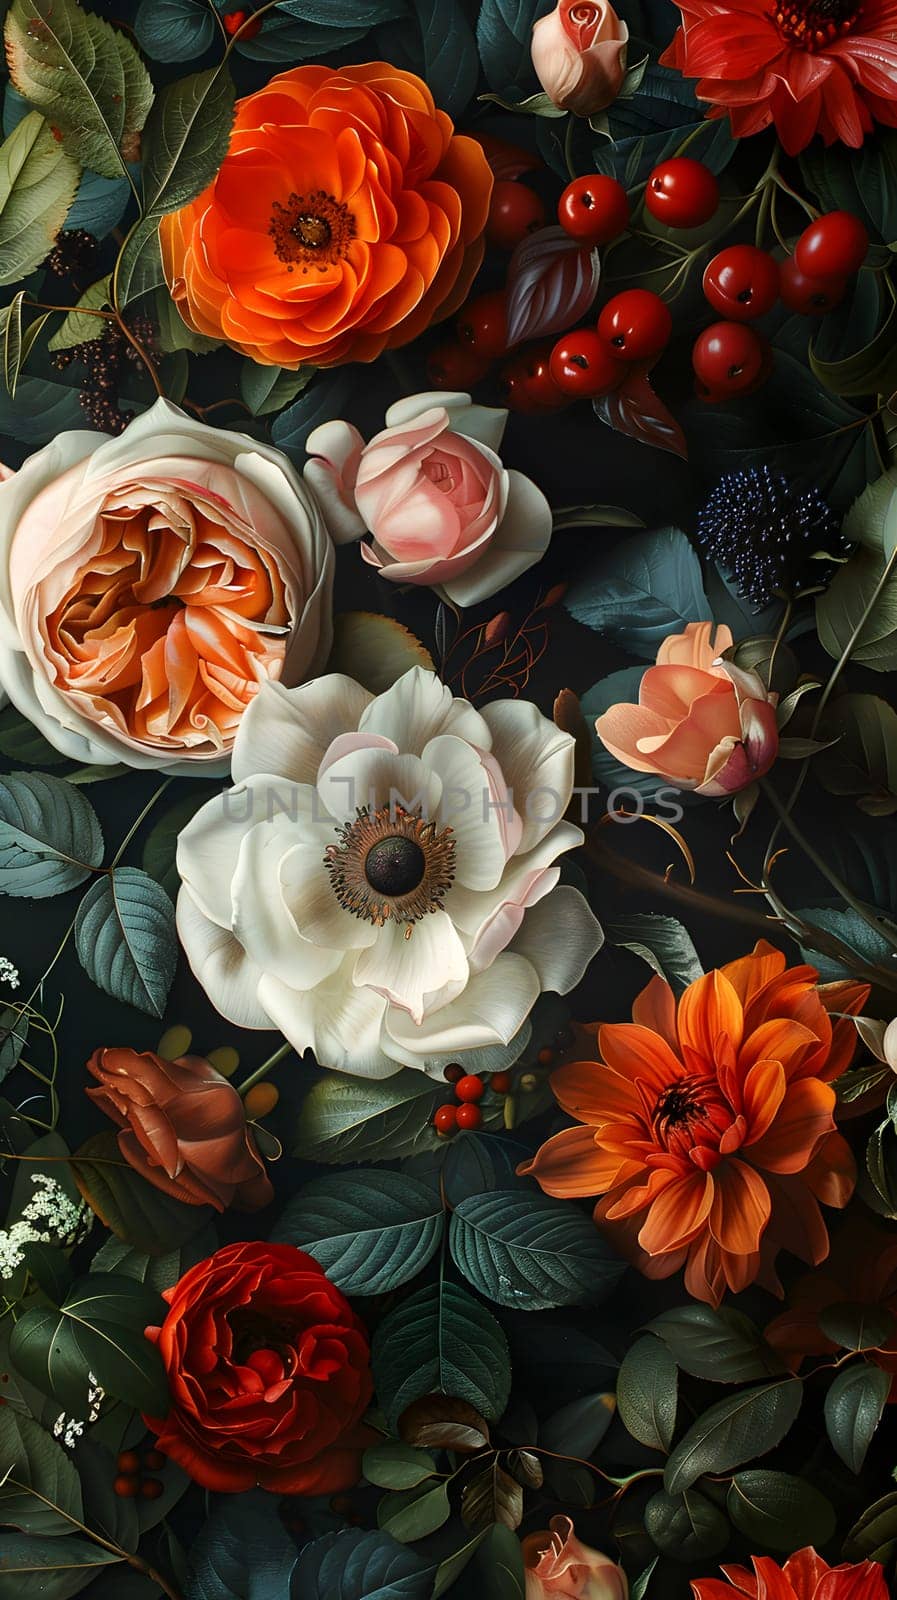 A beautiful painting of flowers and berries on a dark background, showcasing the artists creativity in flower arranging. The bouquet of colorful petals belongs to the Rose family